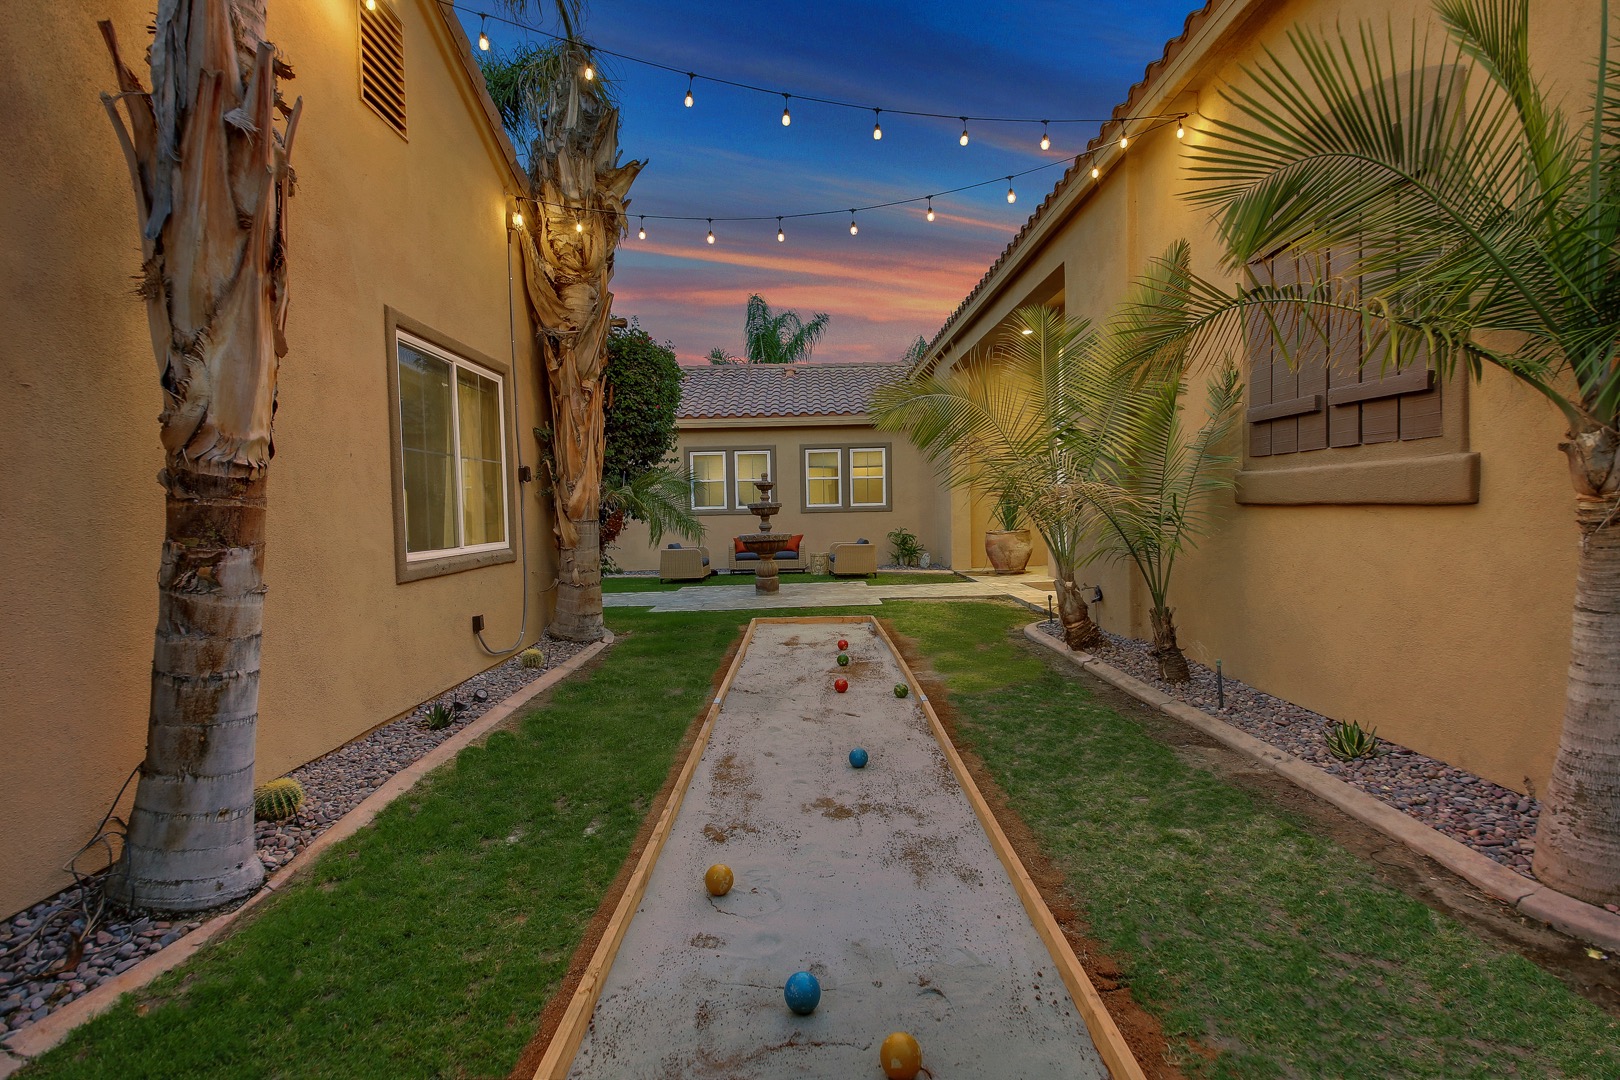 Play a little Bocce under the string lights.